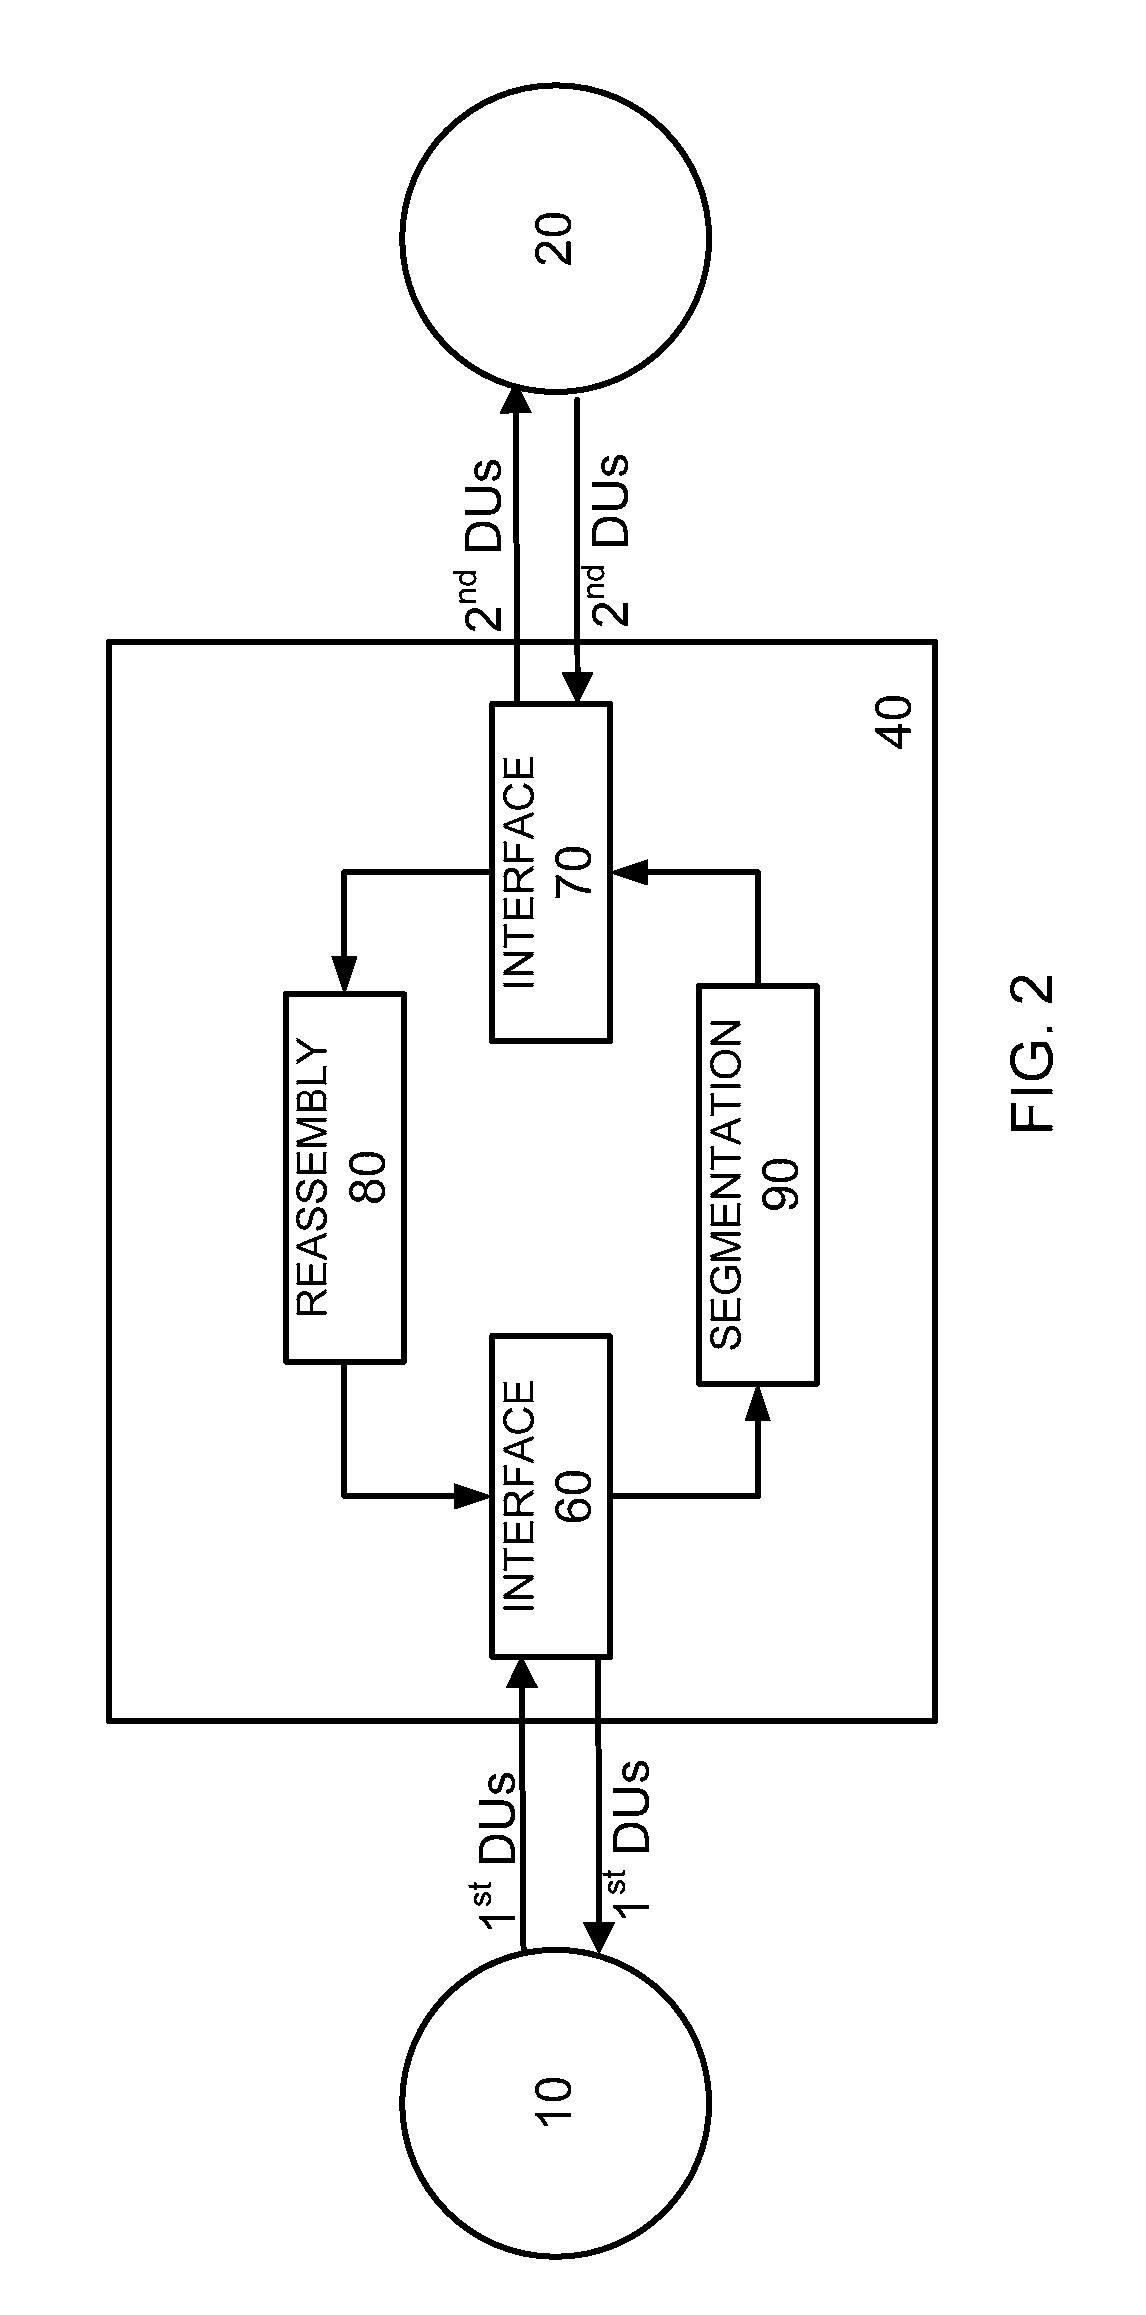 System and method for achieving accelerated throughput